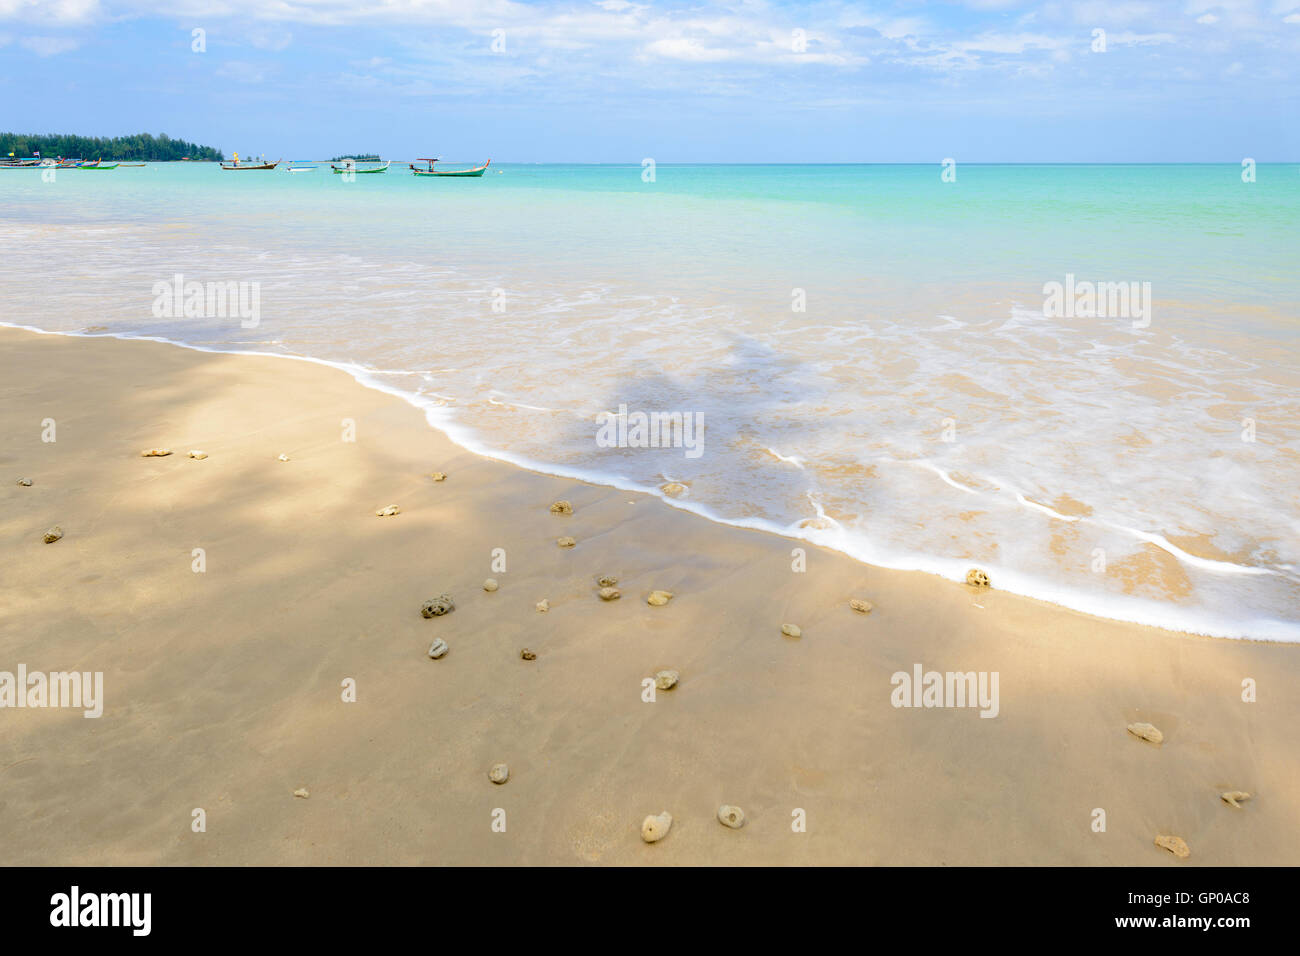 Tropical beach in Thailand, fishing boat. Stock Photo